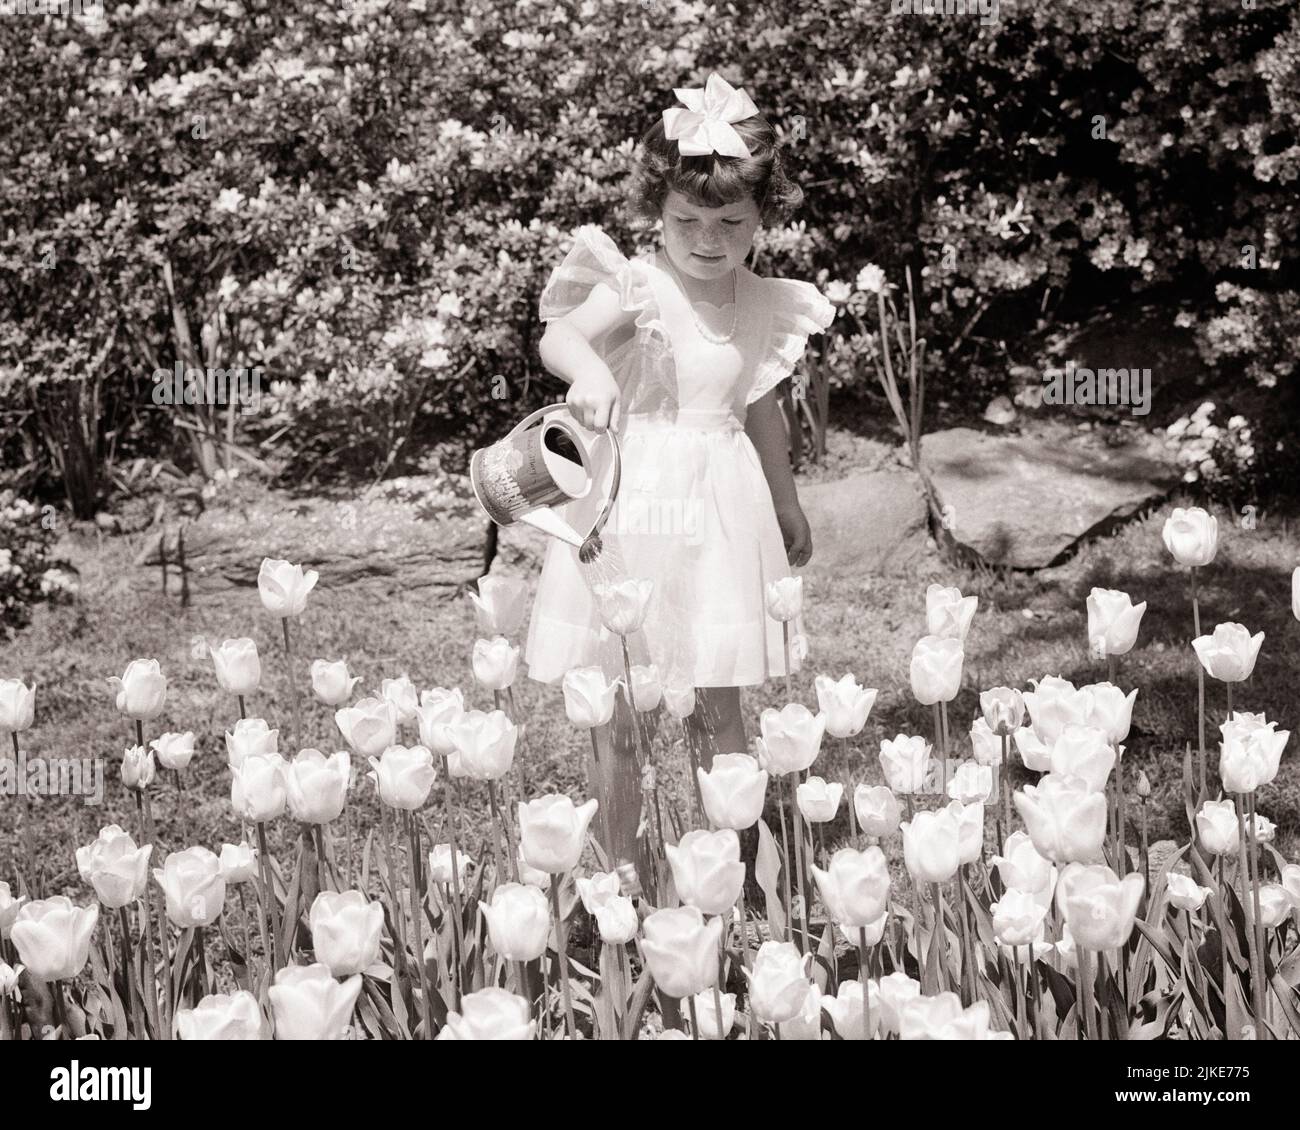 1950s LITTLE GIRL WITH BOW IN HER HAIR WEARING WHITE DRESS WATERING FLOWER BED FULL OF SPRINGTIME TULIPS - j1330 HAR001 HARS B&W HAPPINESS HIGH ANGLE CHORE EXCITEMENT RECREATION TULIPS CONCEPTUAL WATERING CAN GARDENS STYLISH FANCY DRESS GROWTH JUVENILES RELAXATION SPRINGTIME BLACK AND WHITE CAUCASIAN ETHNICITY HAR001 OLD FASHIONED Stock Photo